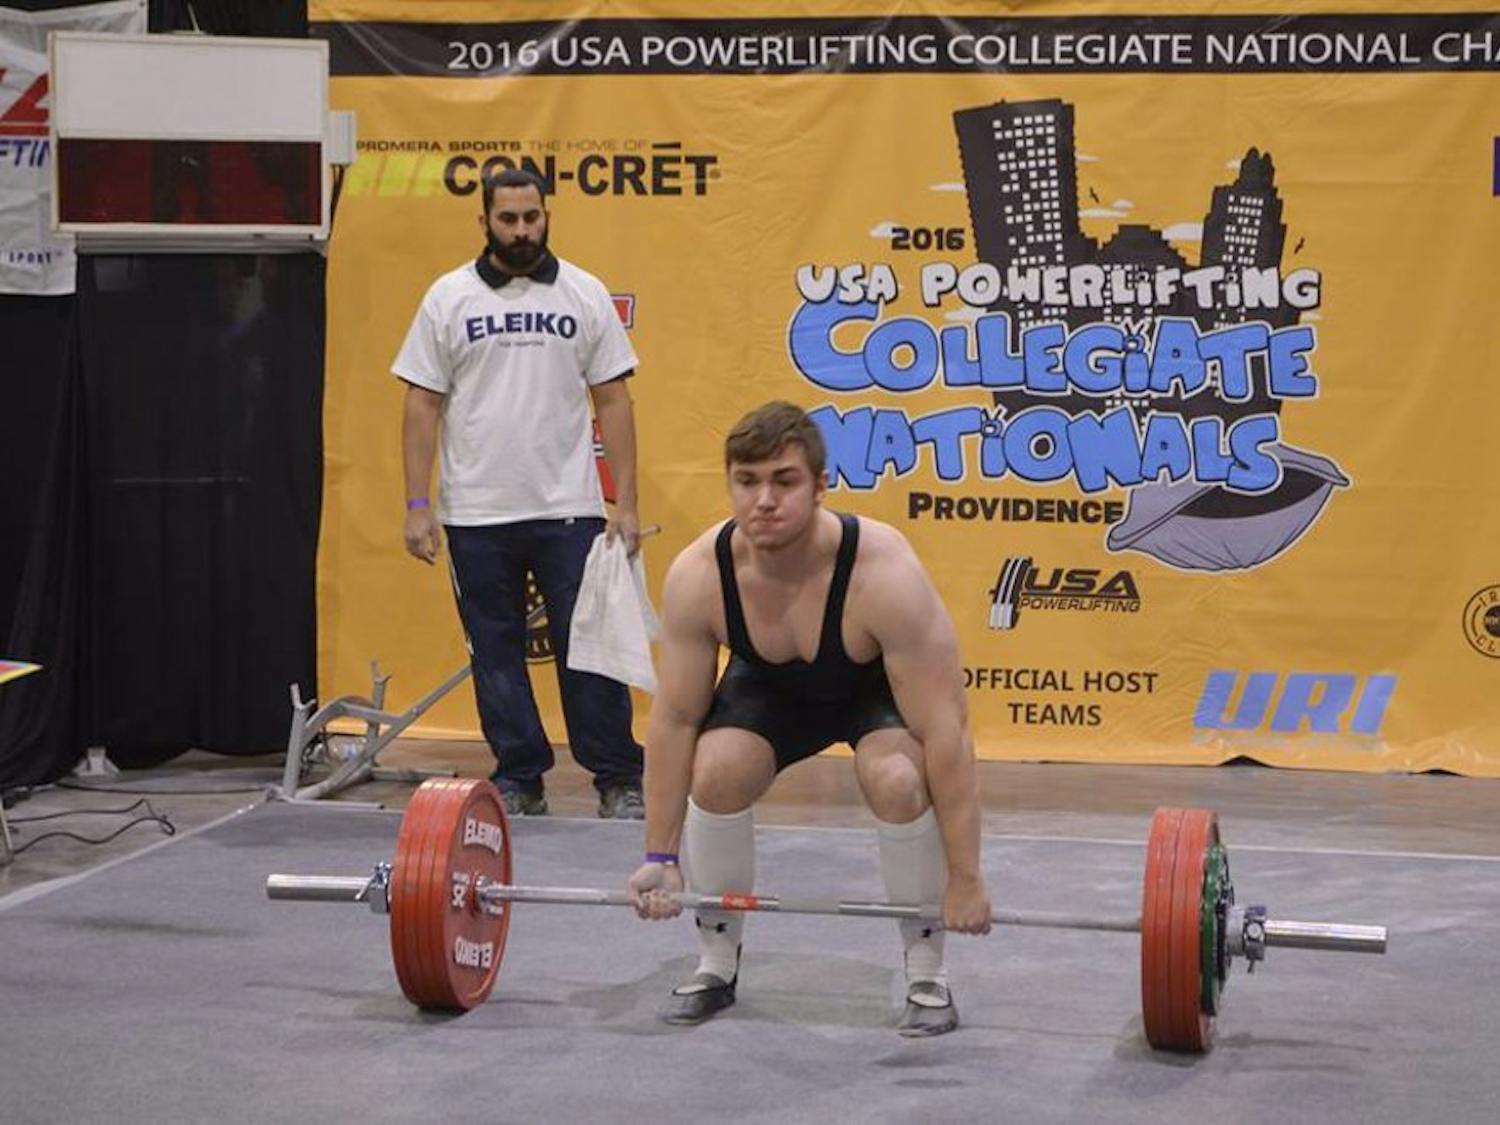 Drake Corbin ’17 pulled 232.5 kilograms during the U.S.A. Powerlifting Collegiate National Championships.